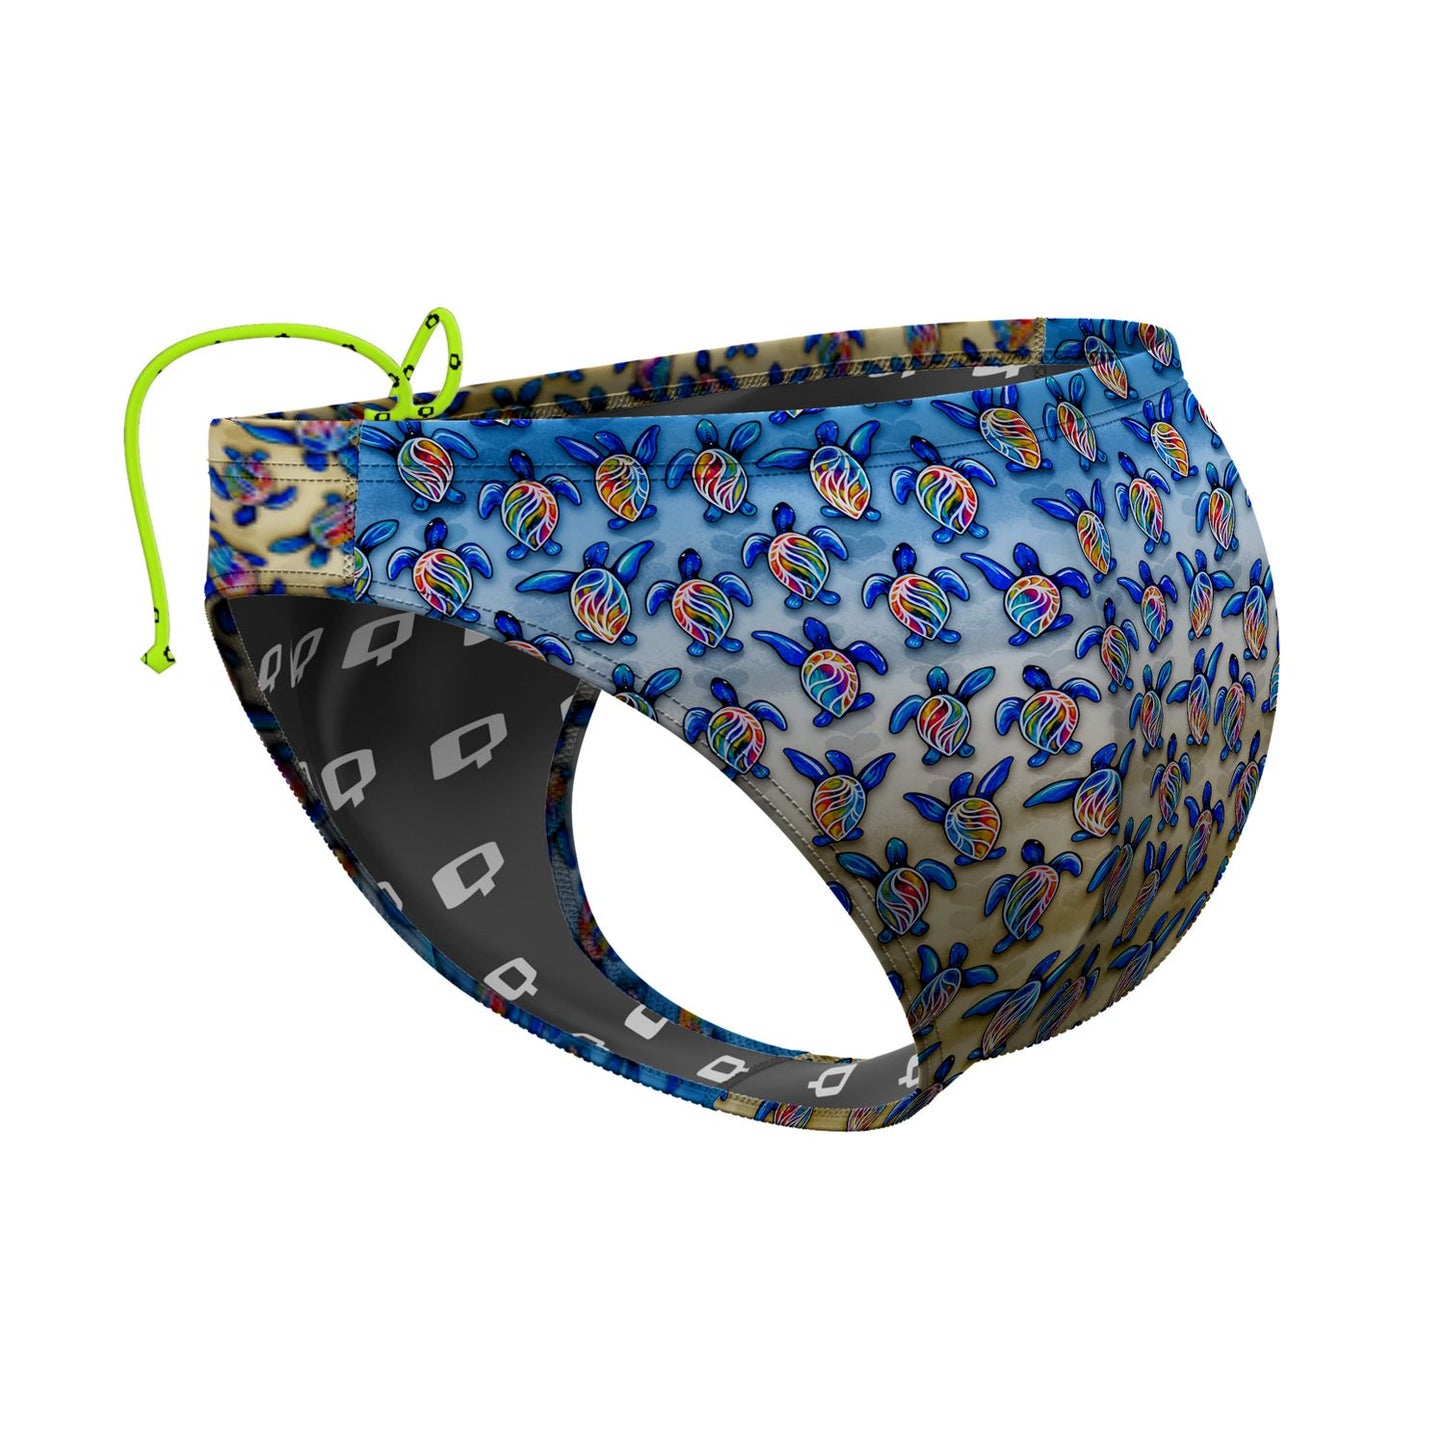 Turtle Trot Waterpolo Brief